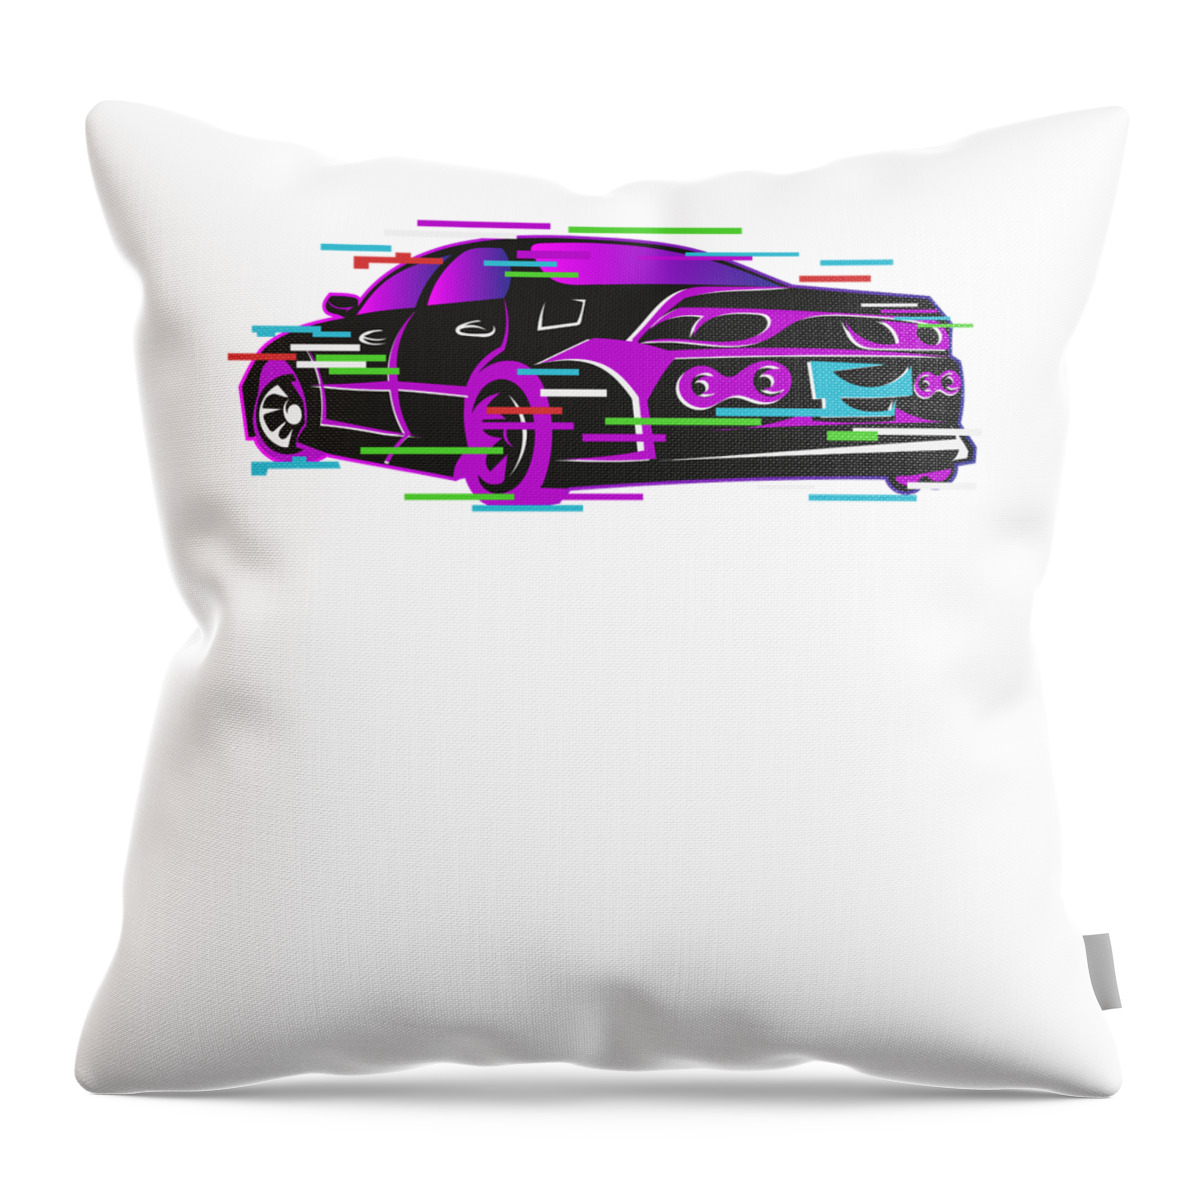 Jdm Throw Pillow featuring the digital art JDM Tuning Car Racing Glitch Effect #5 by Toms Tee Store